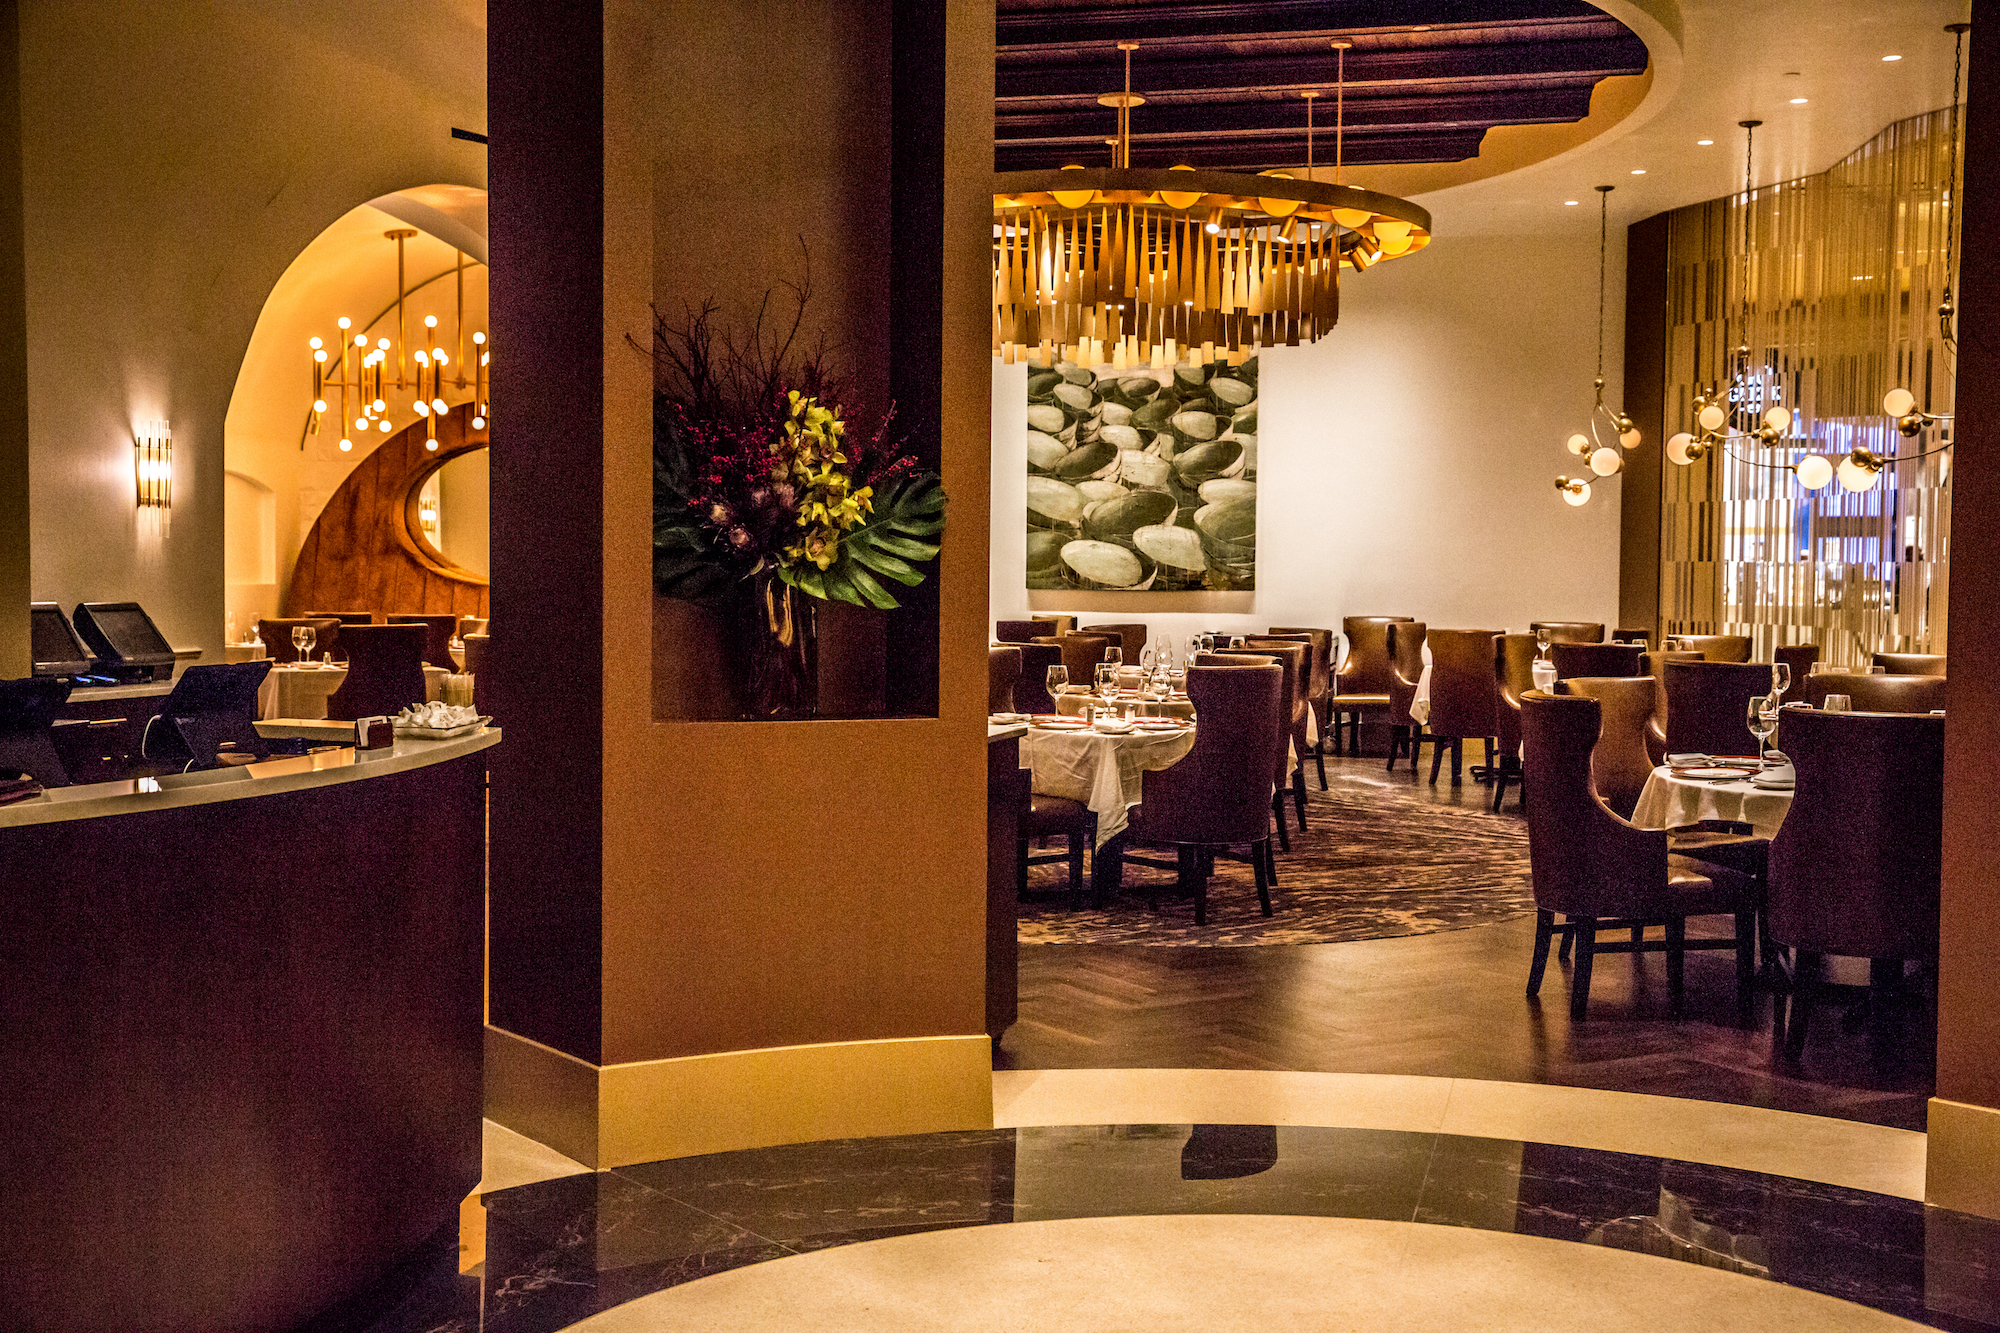 The renovated dining room at Delmonico Steakhouse